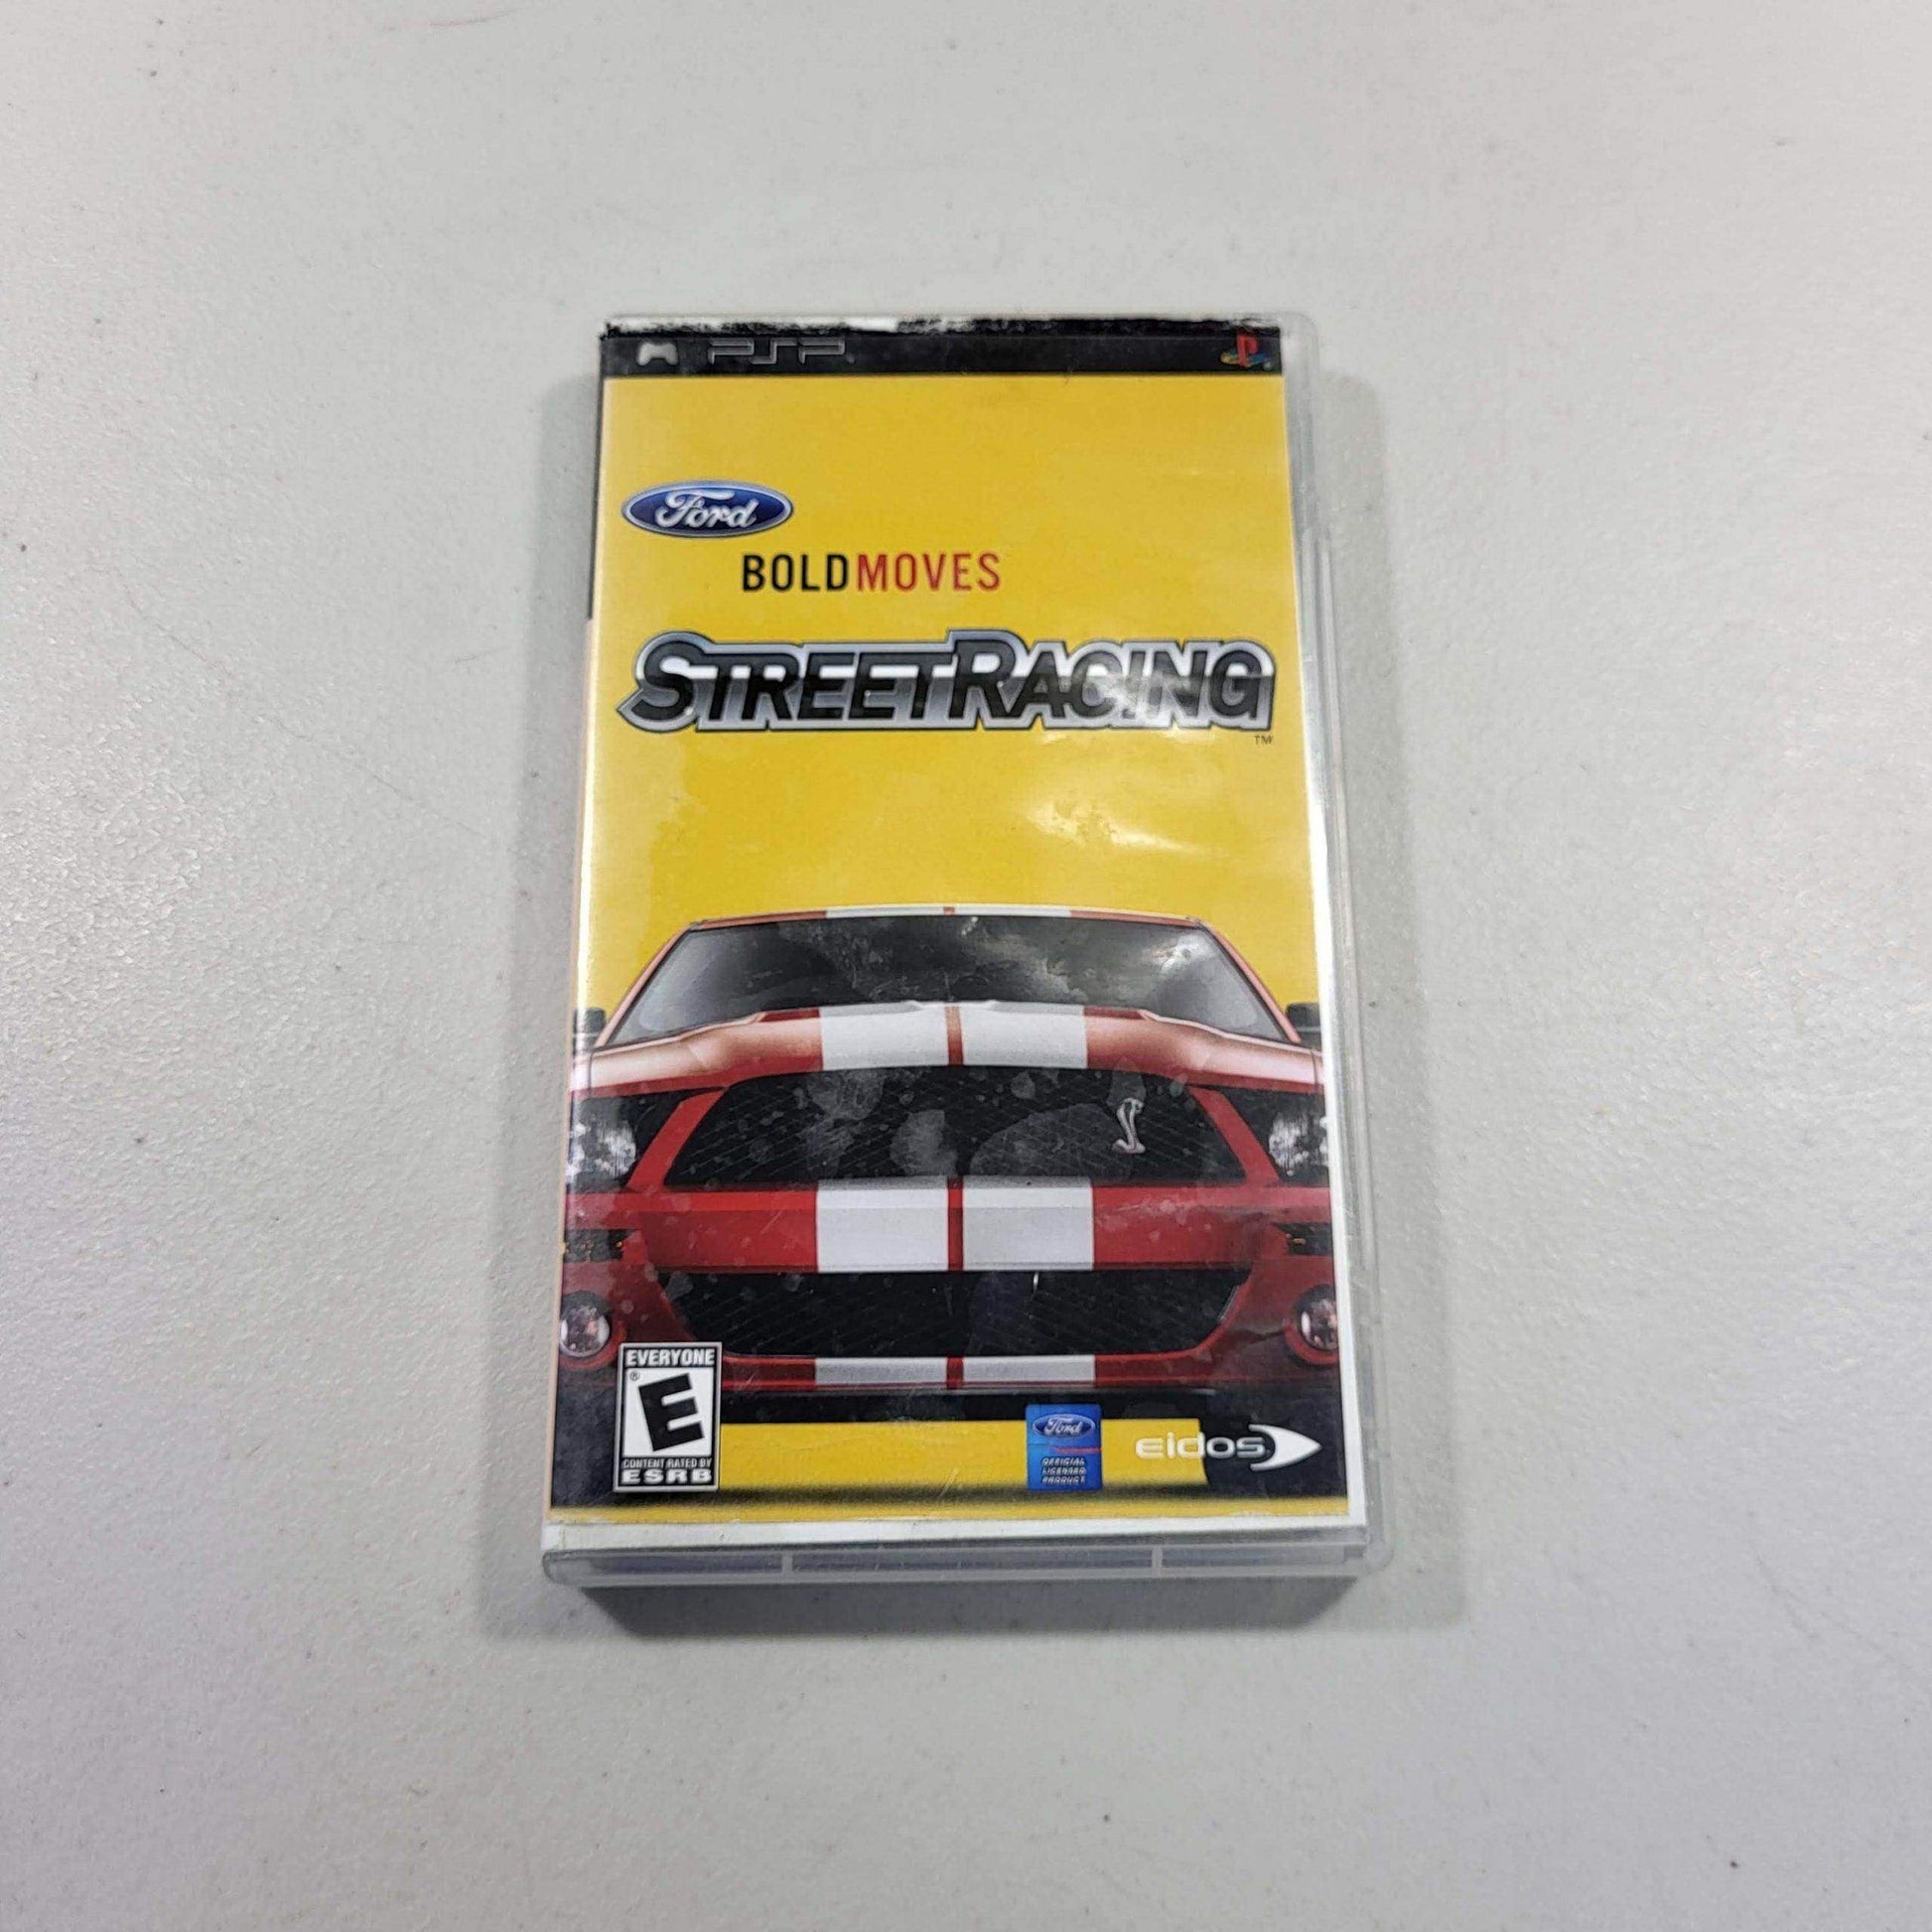 Ford Bold Moves Street Racing PSP (Cib) -- Jeux Video Hobby 